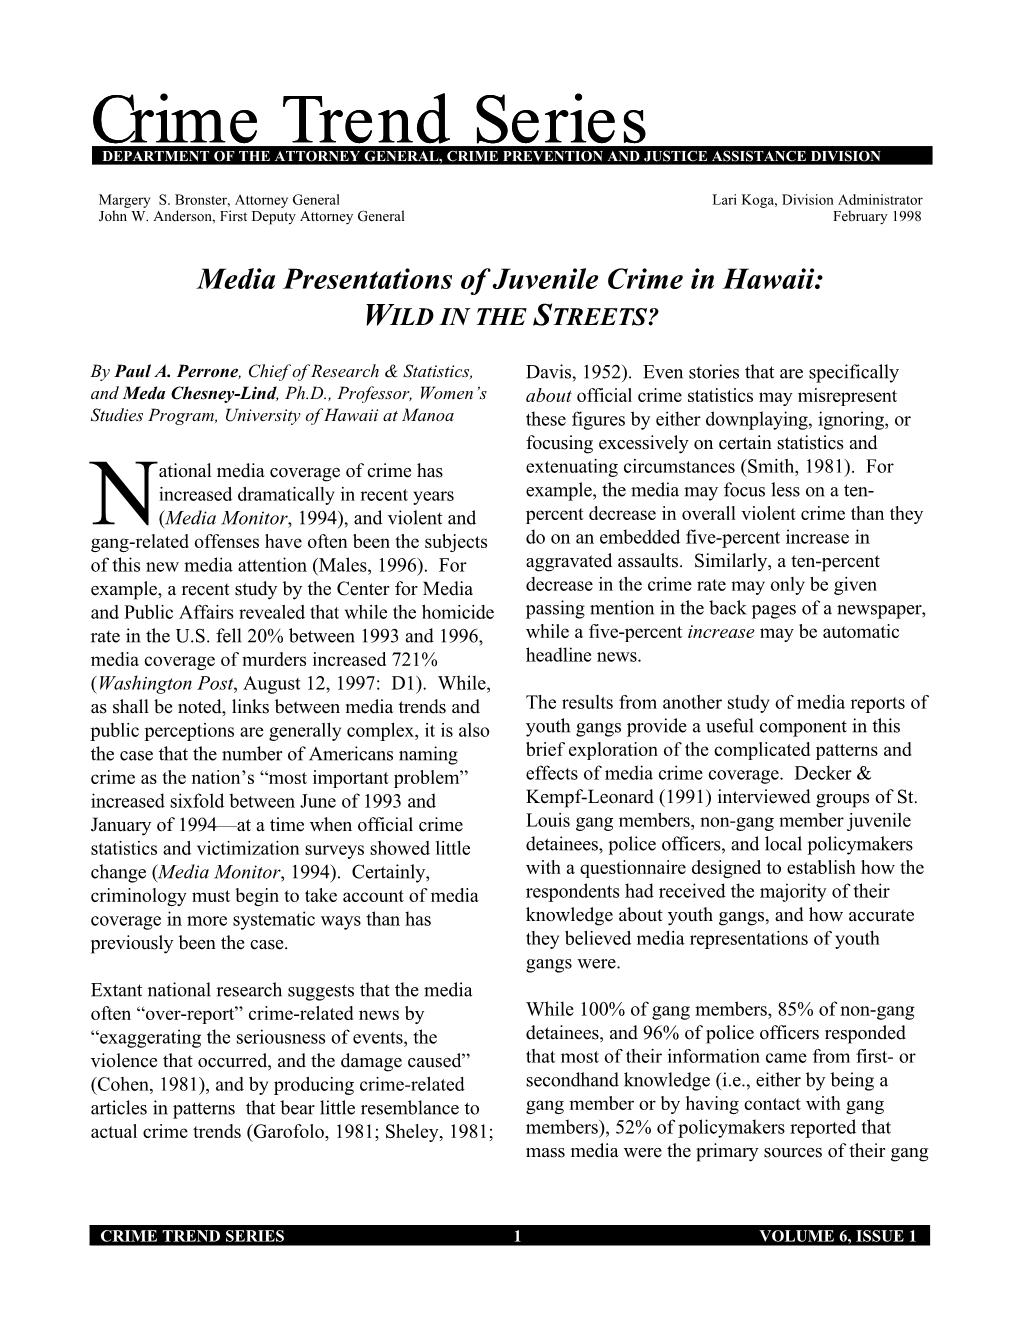 Media Presentations of Juvenile Crime in Hawaii: WILD in the STREETS?